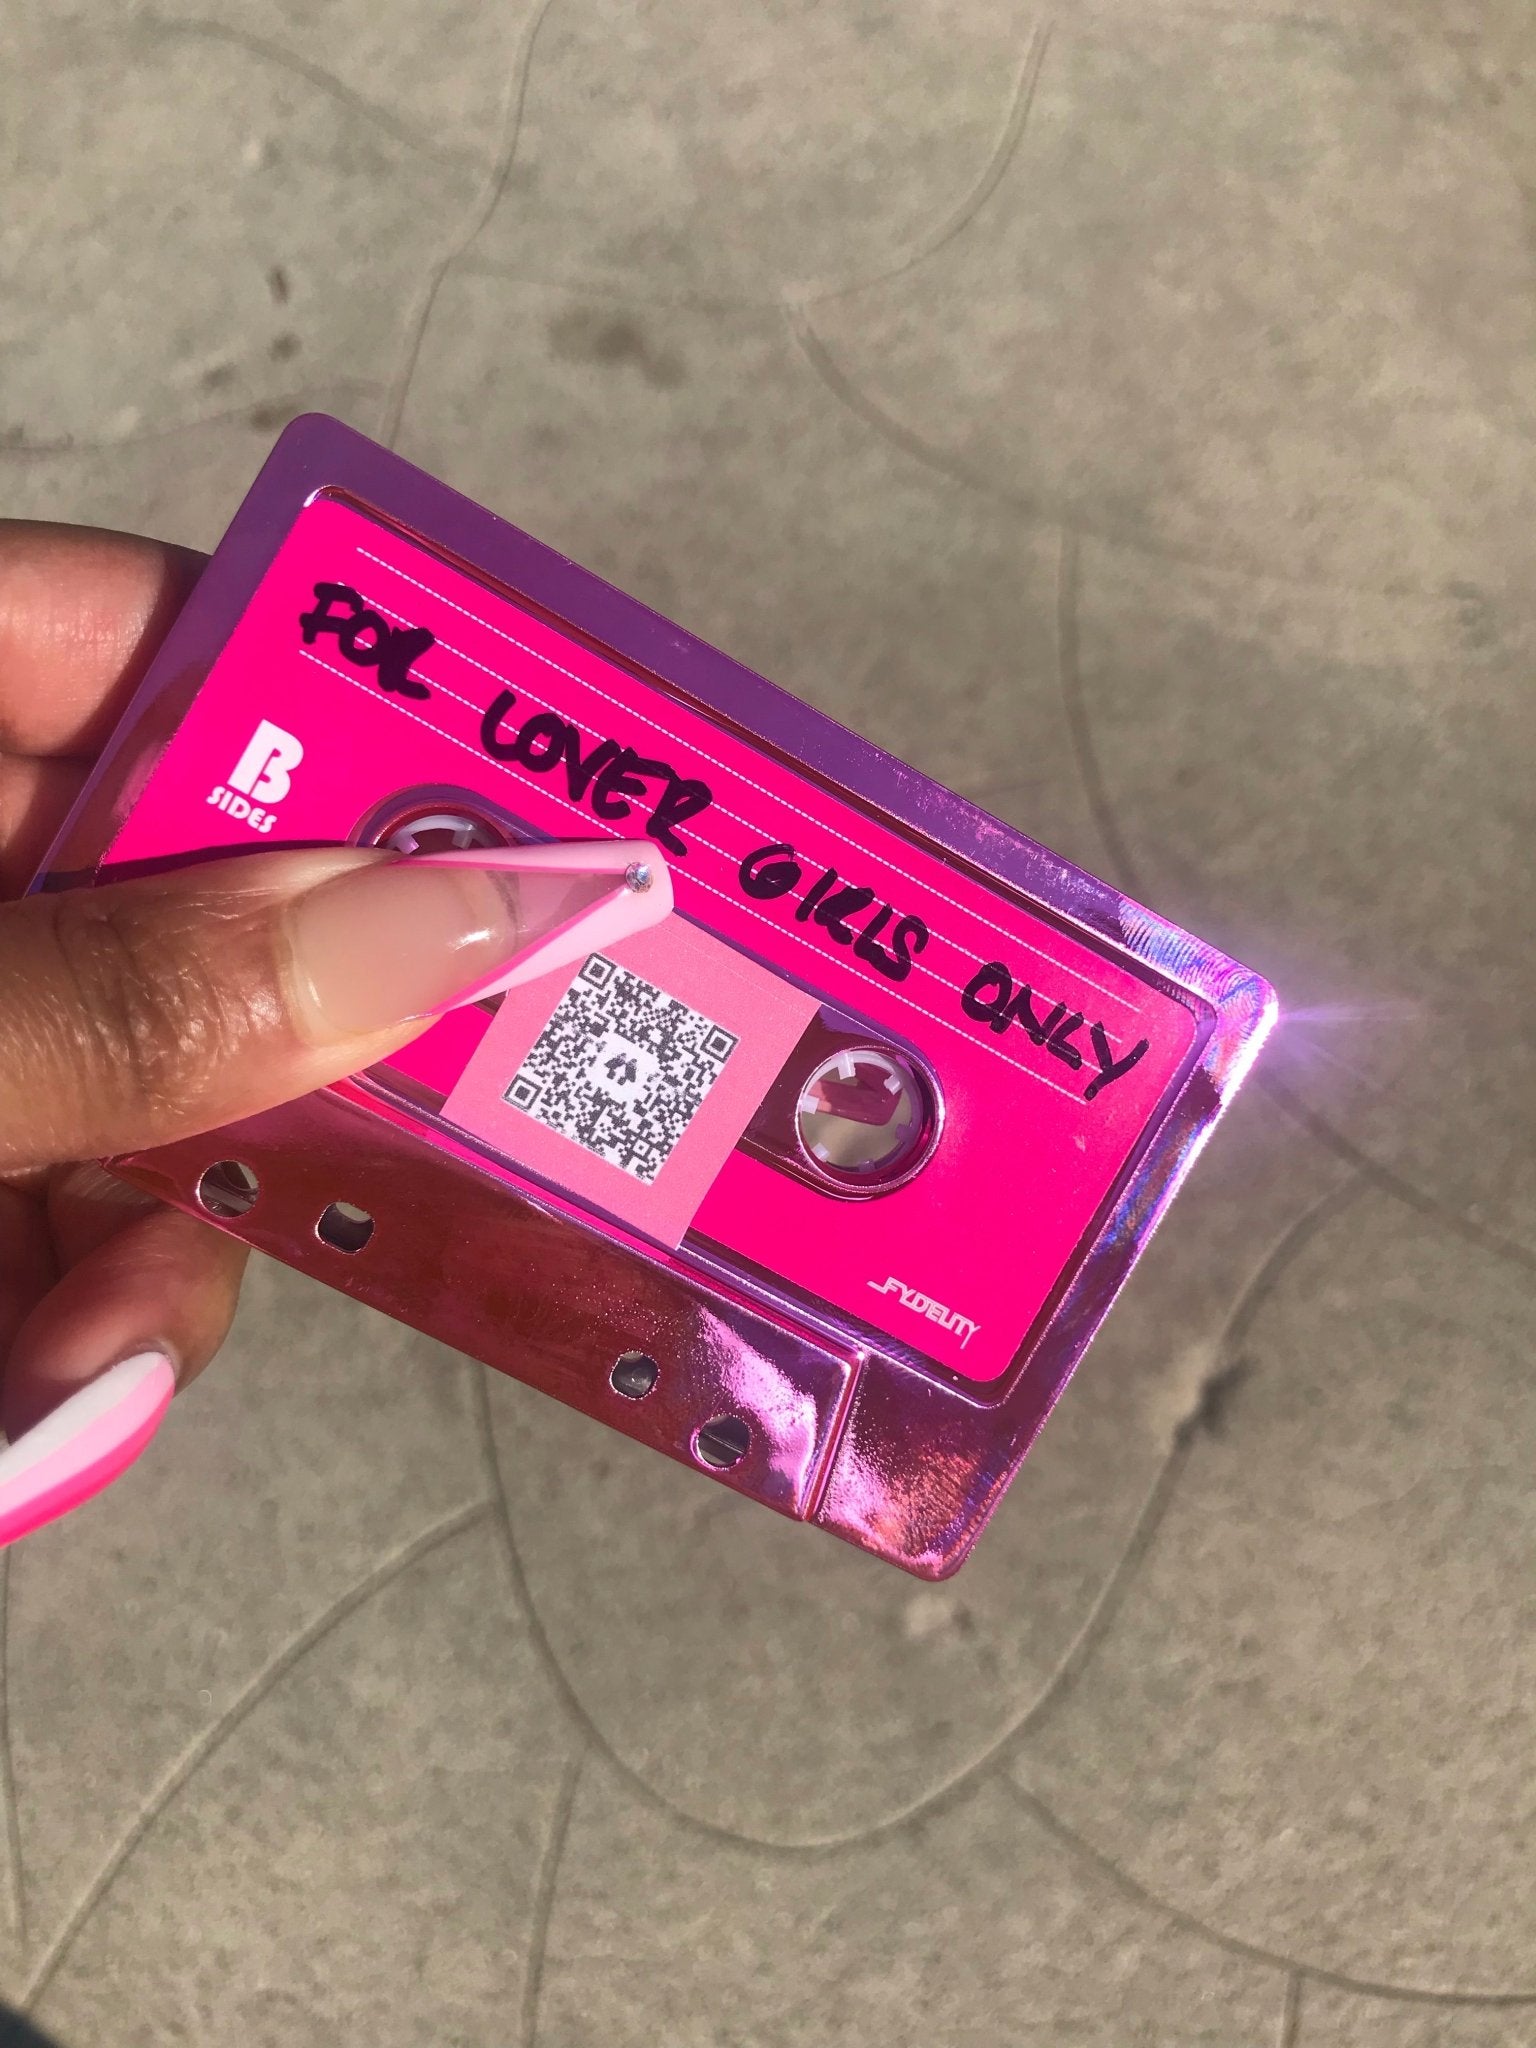 For Lover Girls Only Playlist Cassette Tape - Ambition Is The New Pink